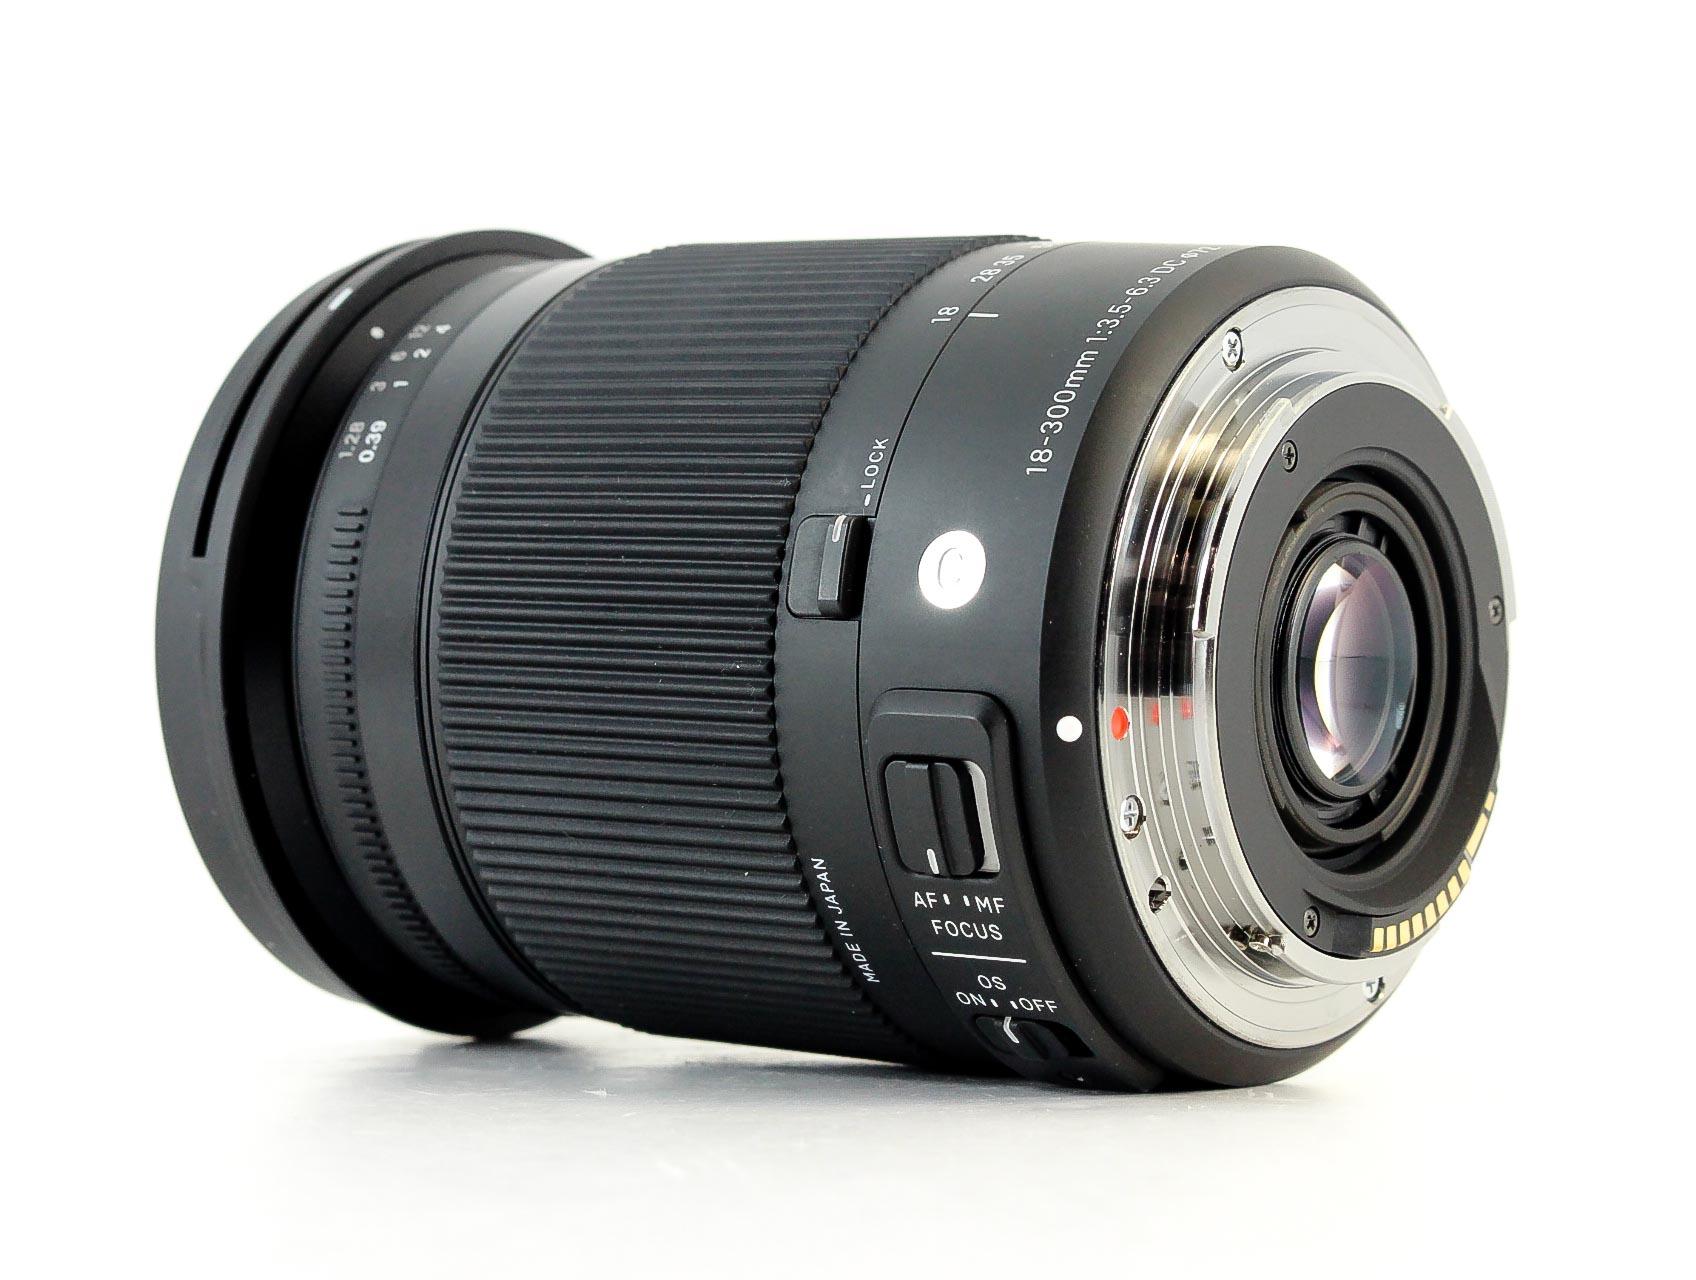 Sigma 18-300mm F3.5-6.3 DC Macro OS HSM 'C' Lens Canon Fit - Lenses and